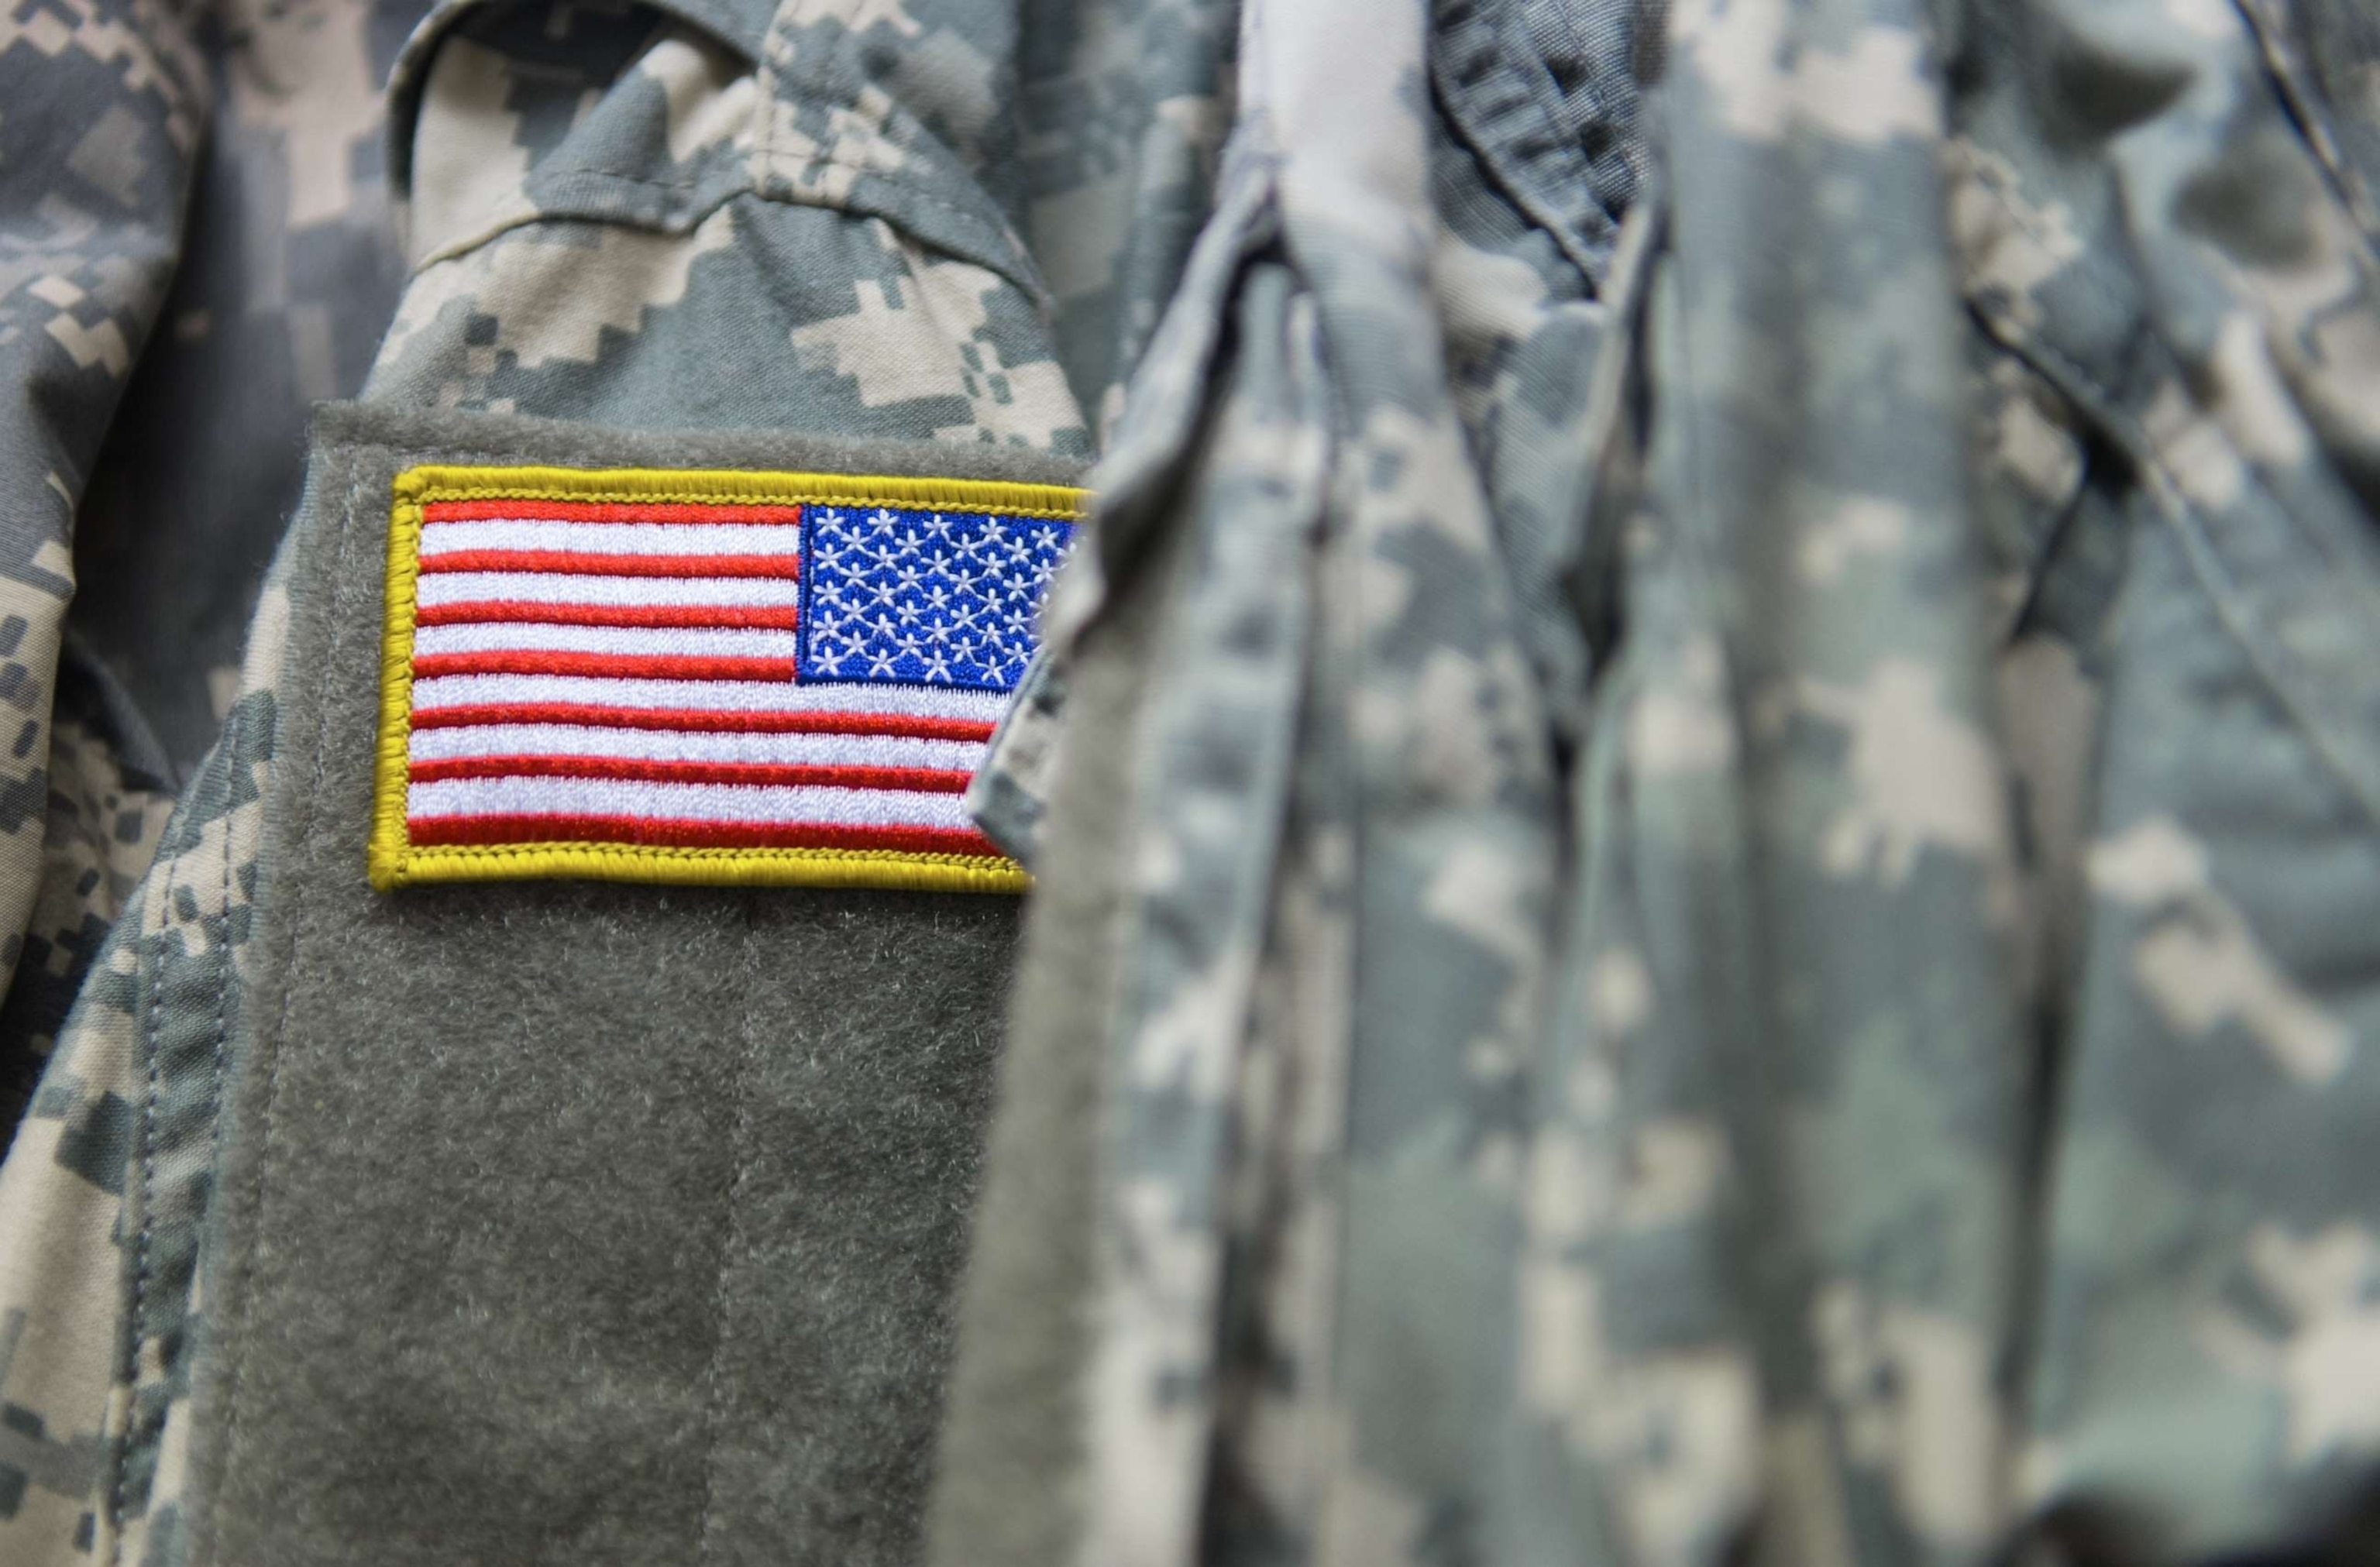 PHOTO: An American flag on the shoulder of Army uniform.